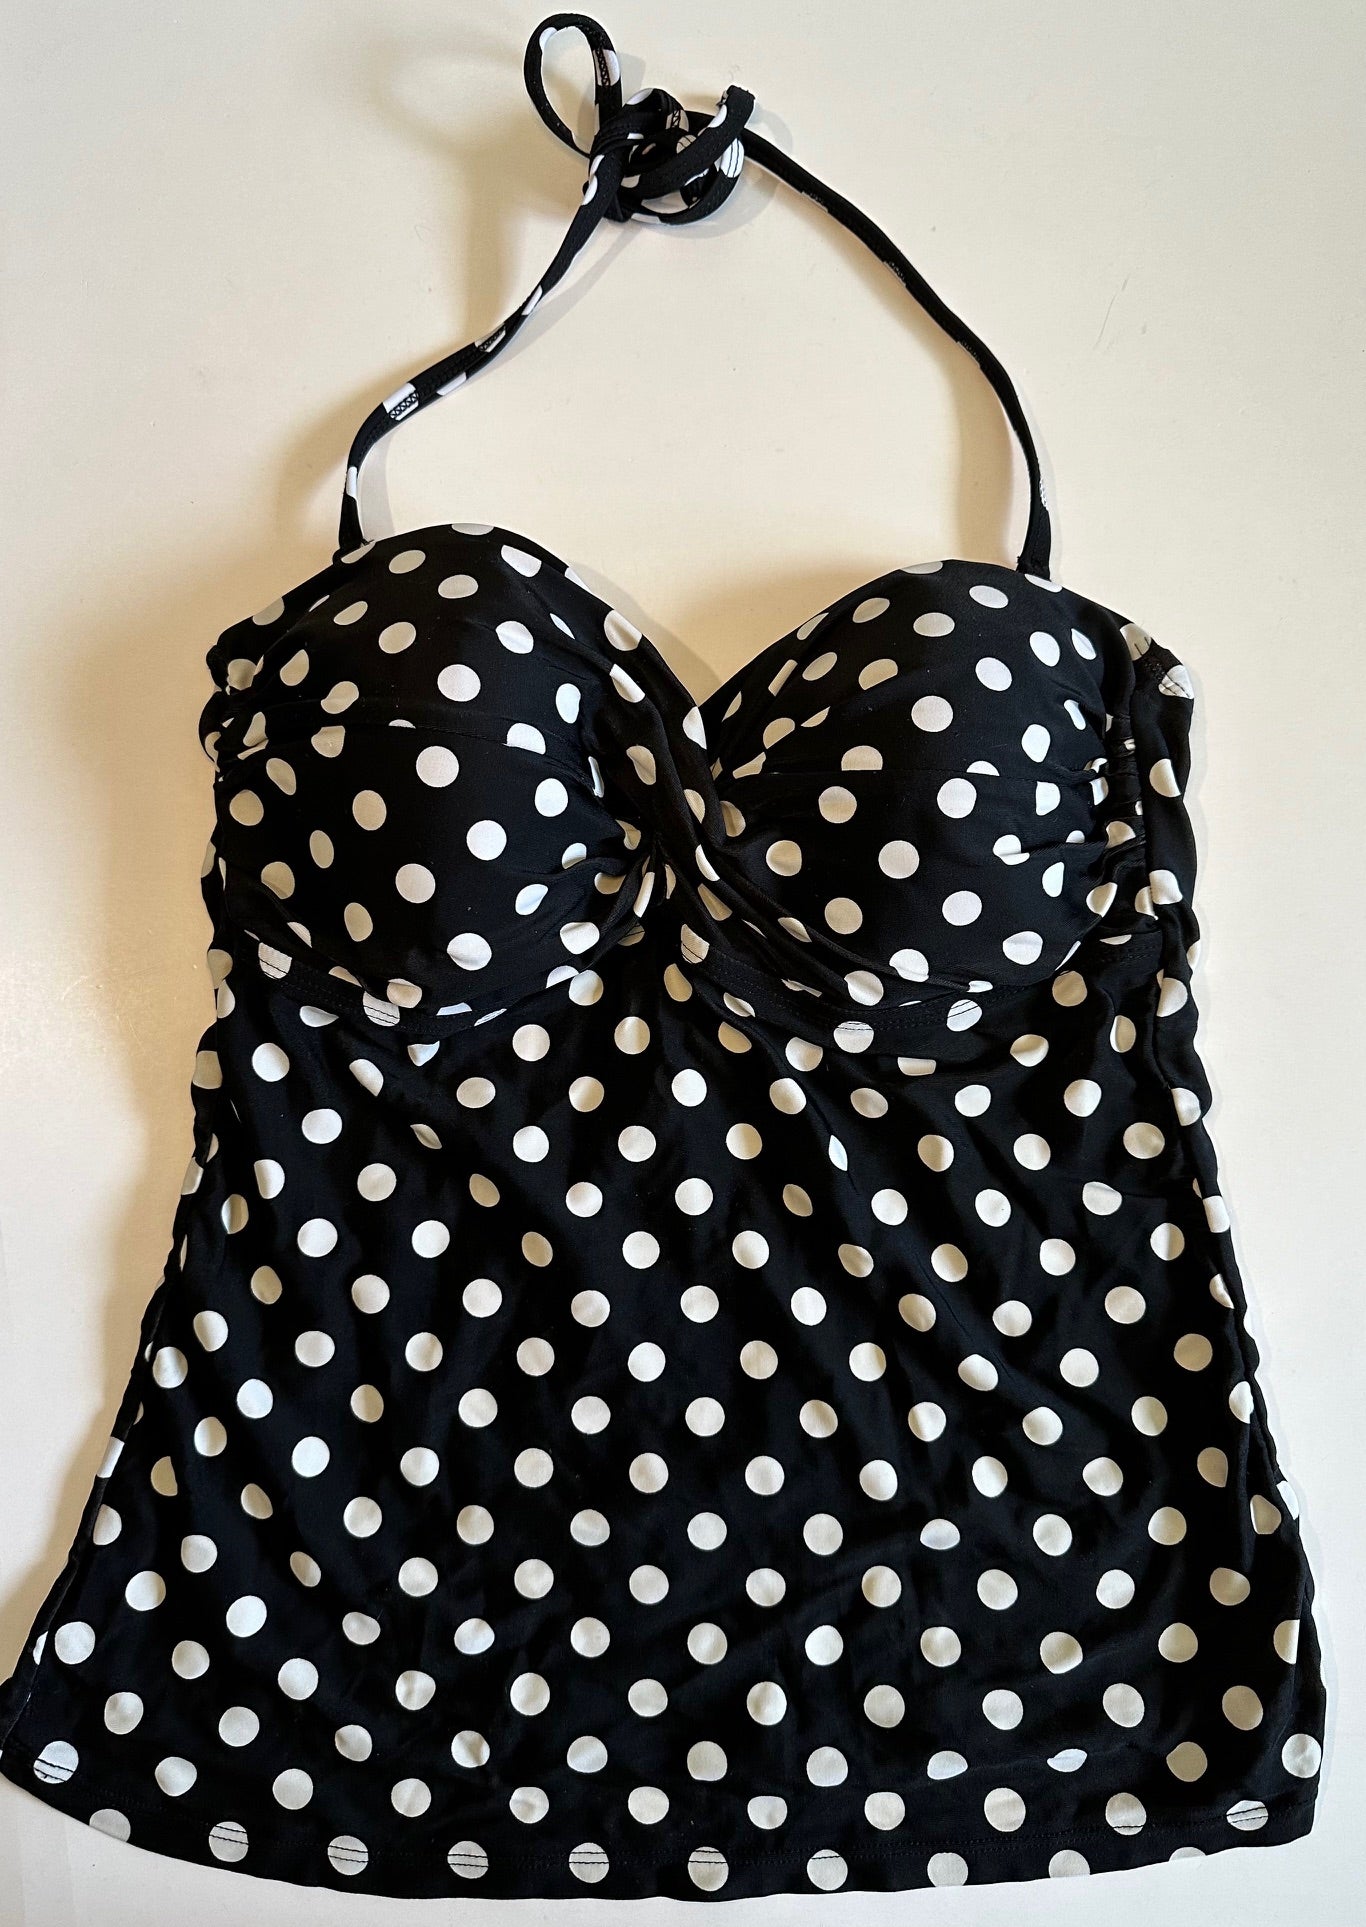 *Adult* George, Black and White Polka-Dot Bathing Suit Top - Size Small